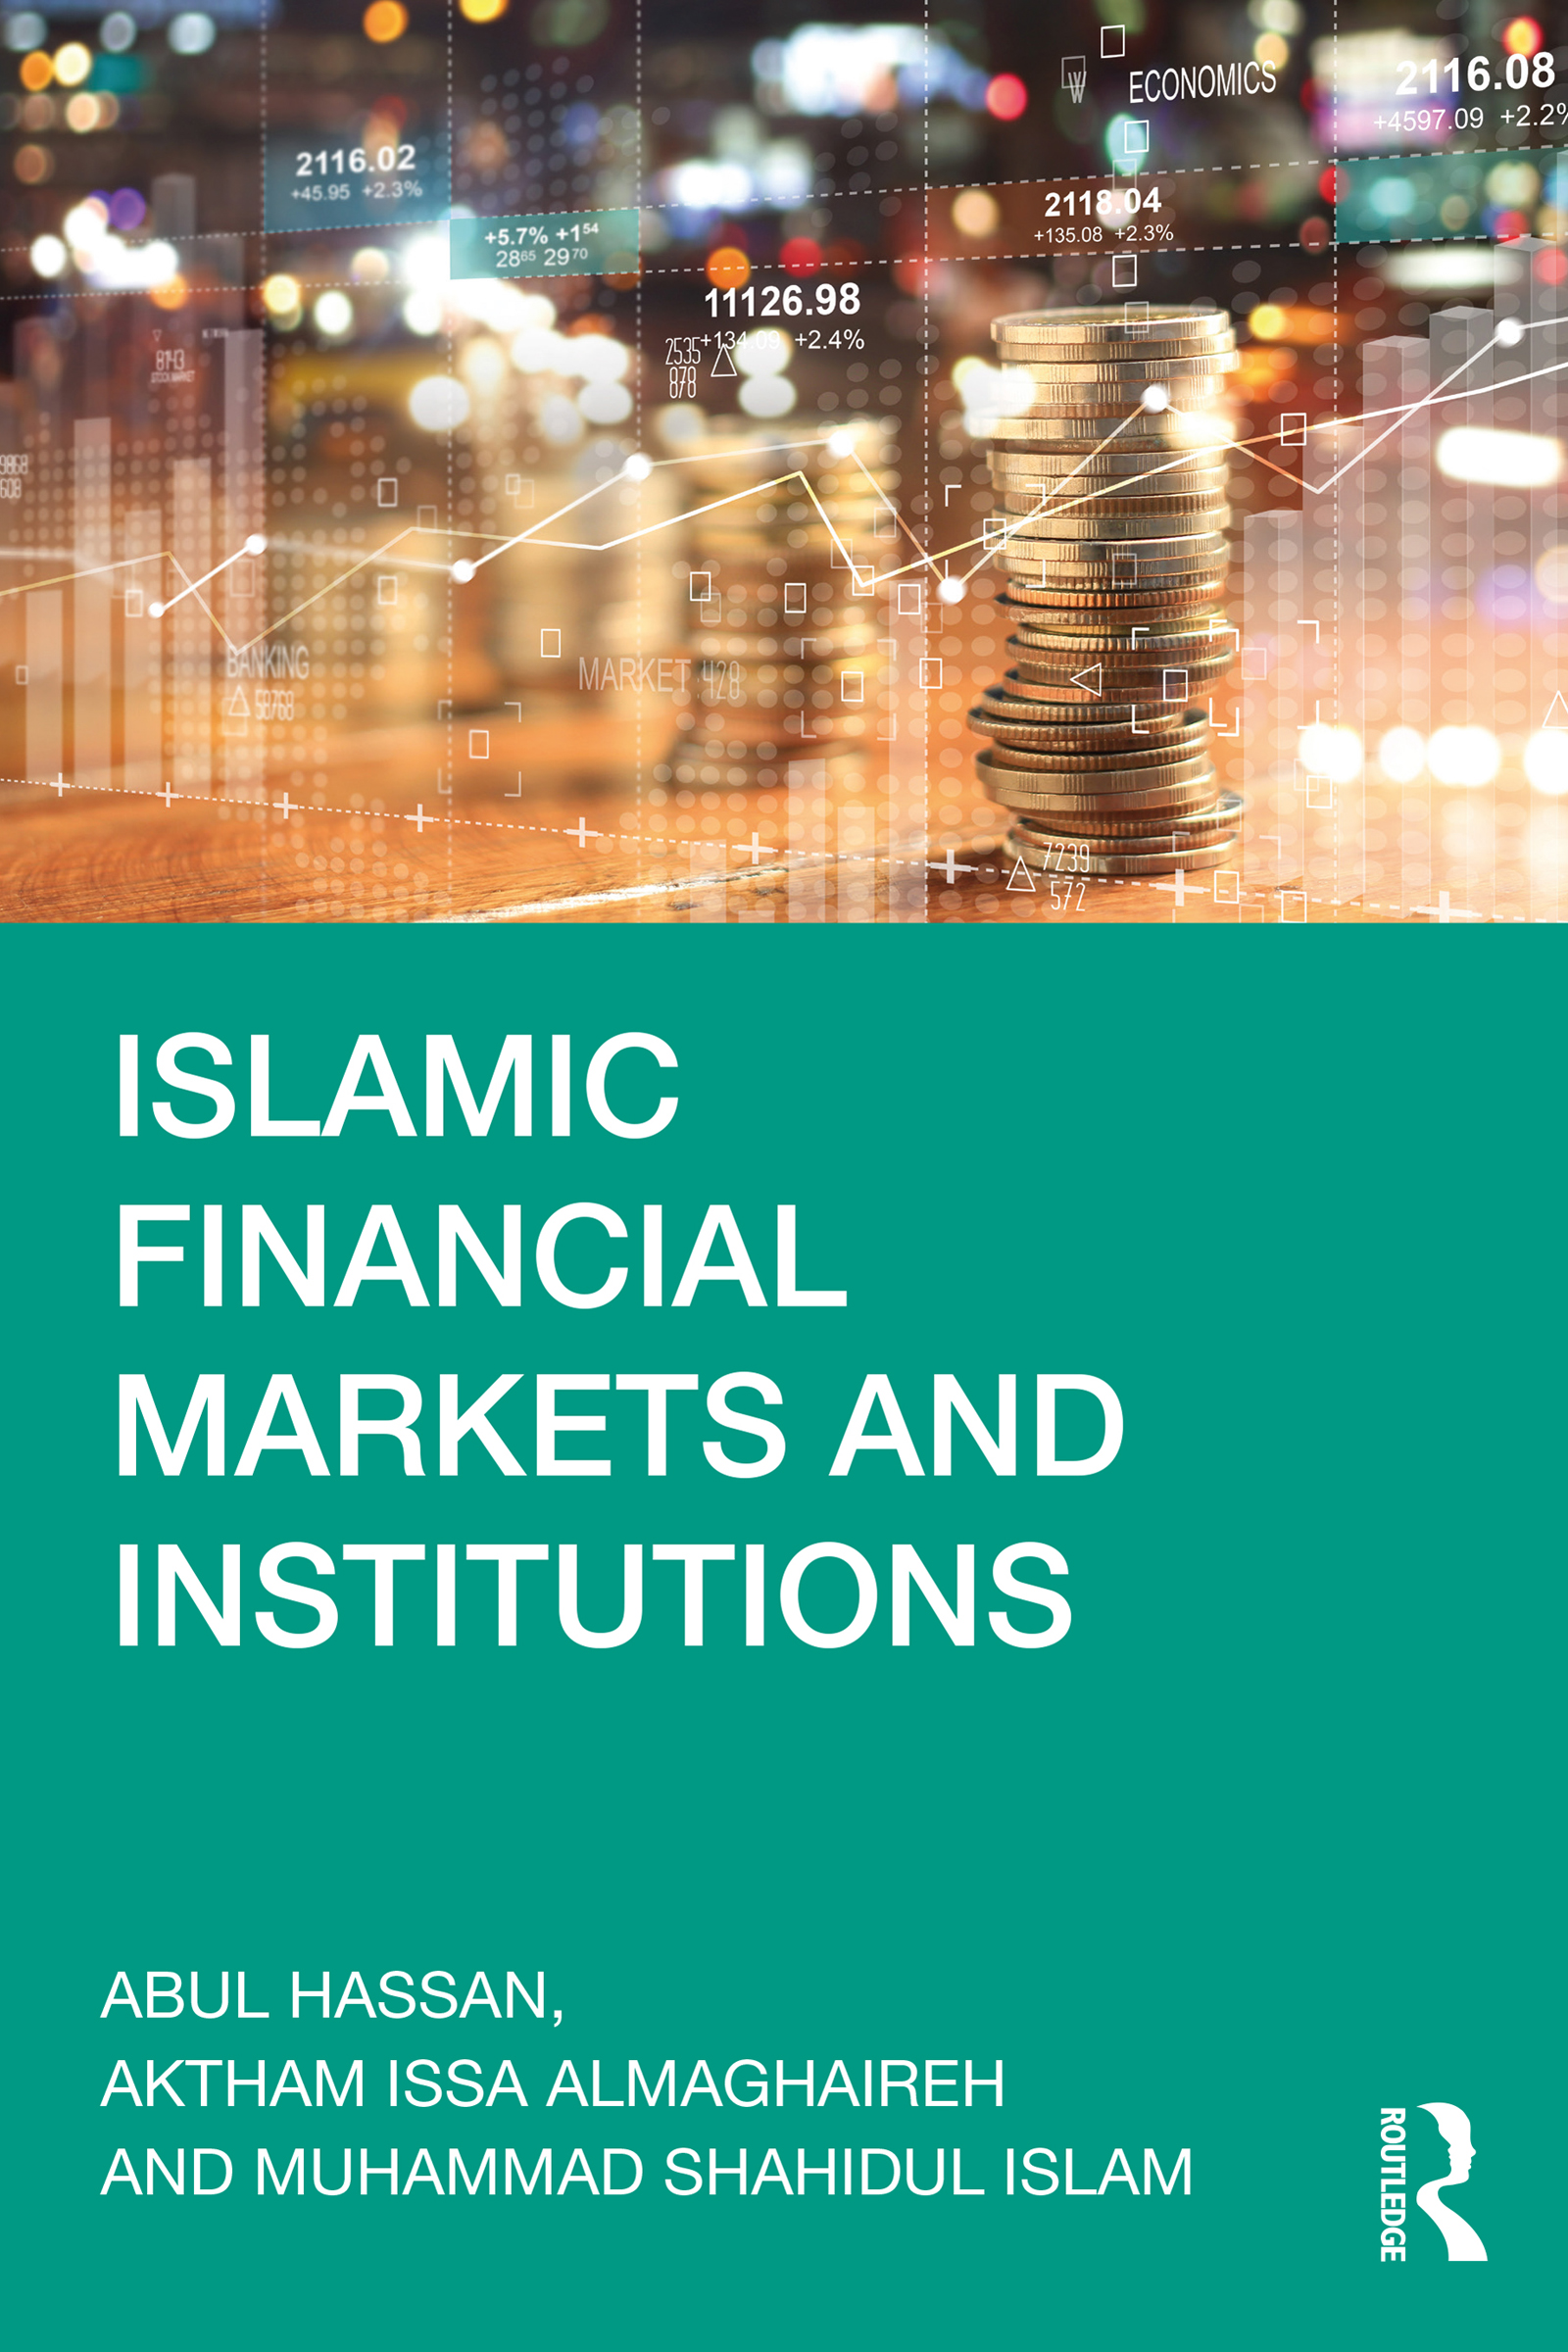 Islamic Financial Markets and Institutions